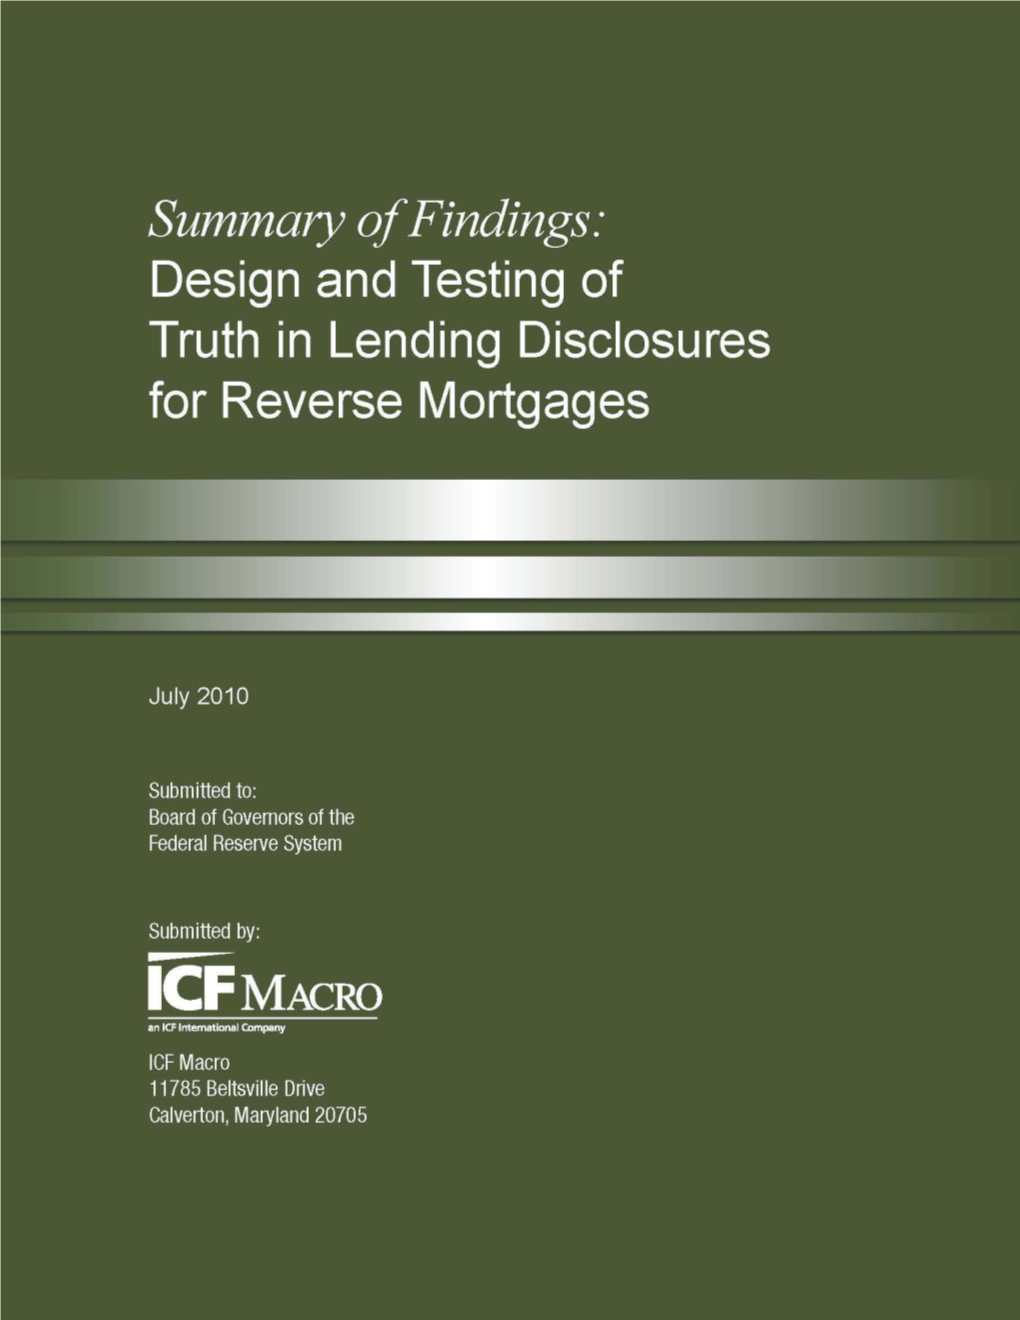 Design and Testing of Truth in Lending Disclosures for Reverse